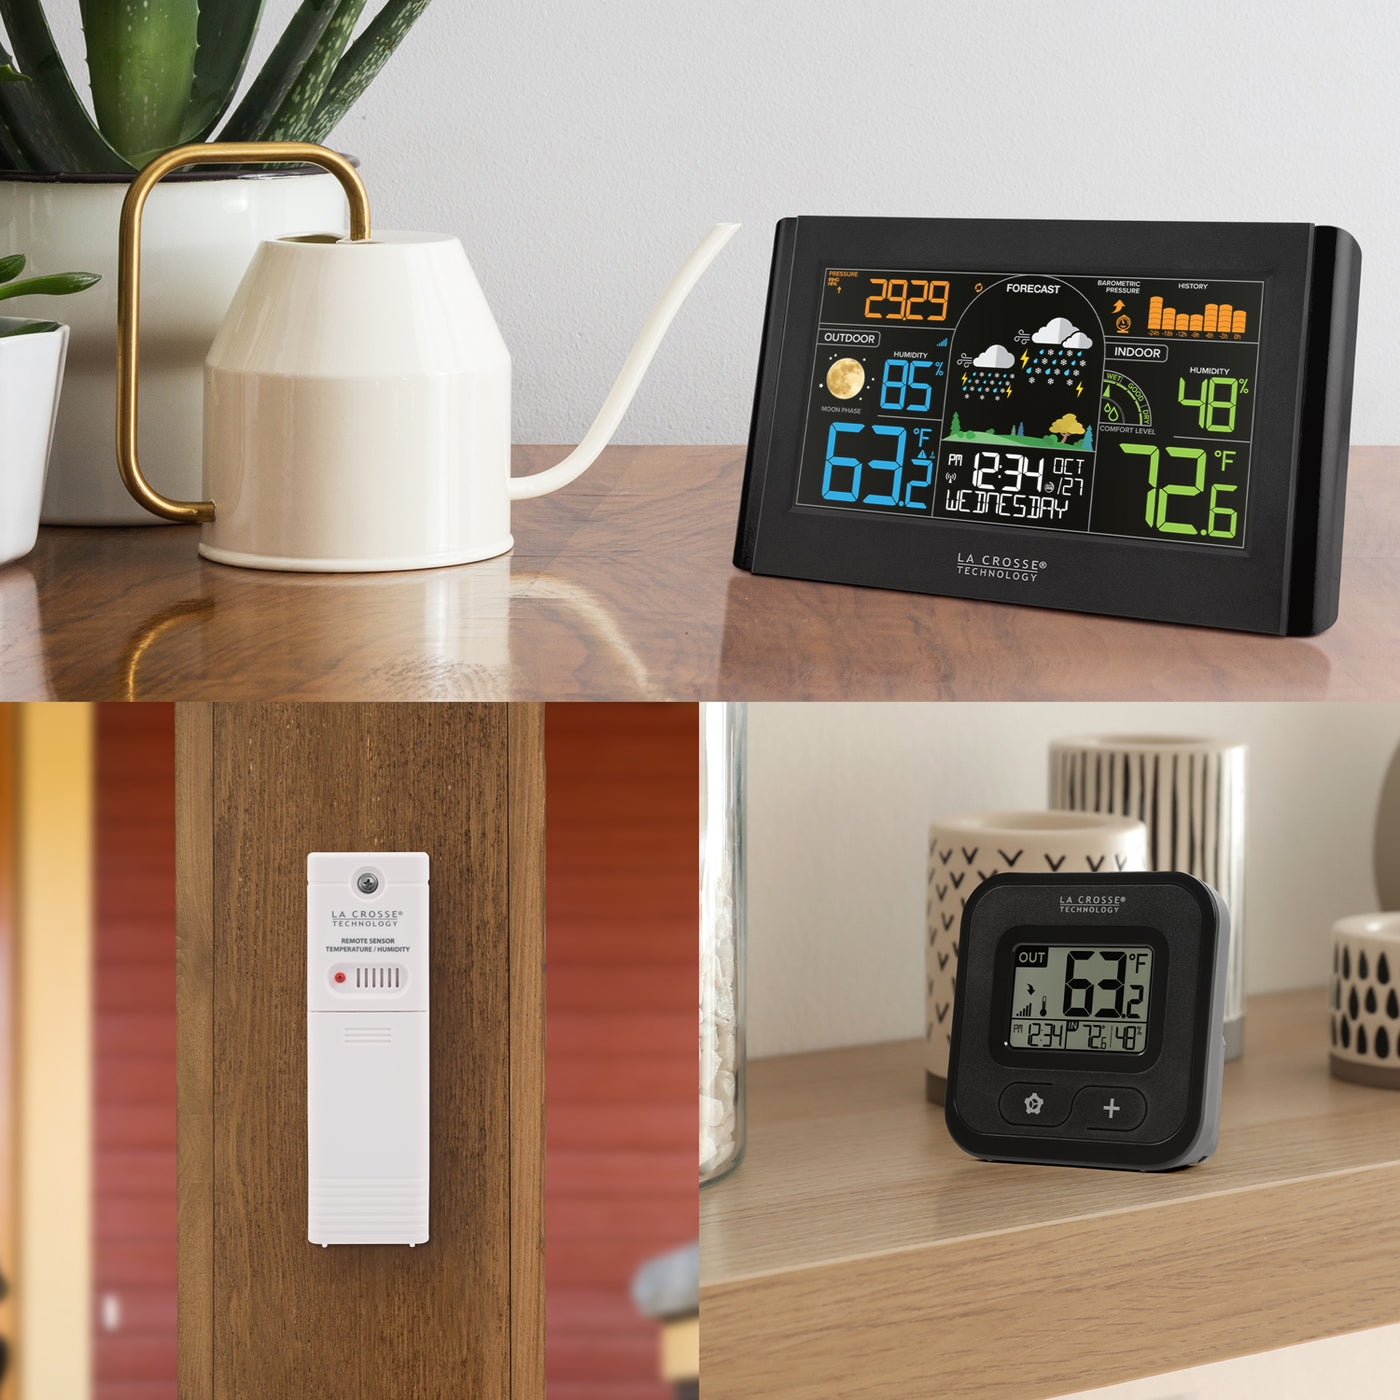 S77925 Wireless Color Weather Station with Atomic Time & Date 